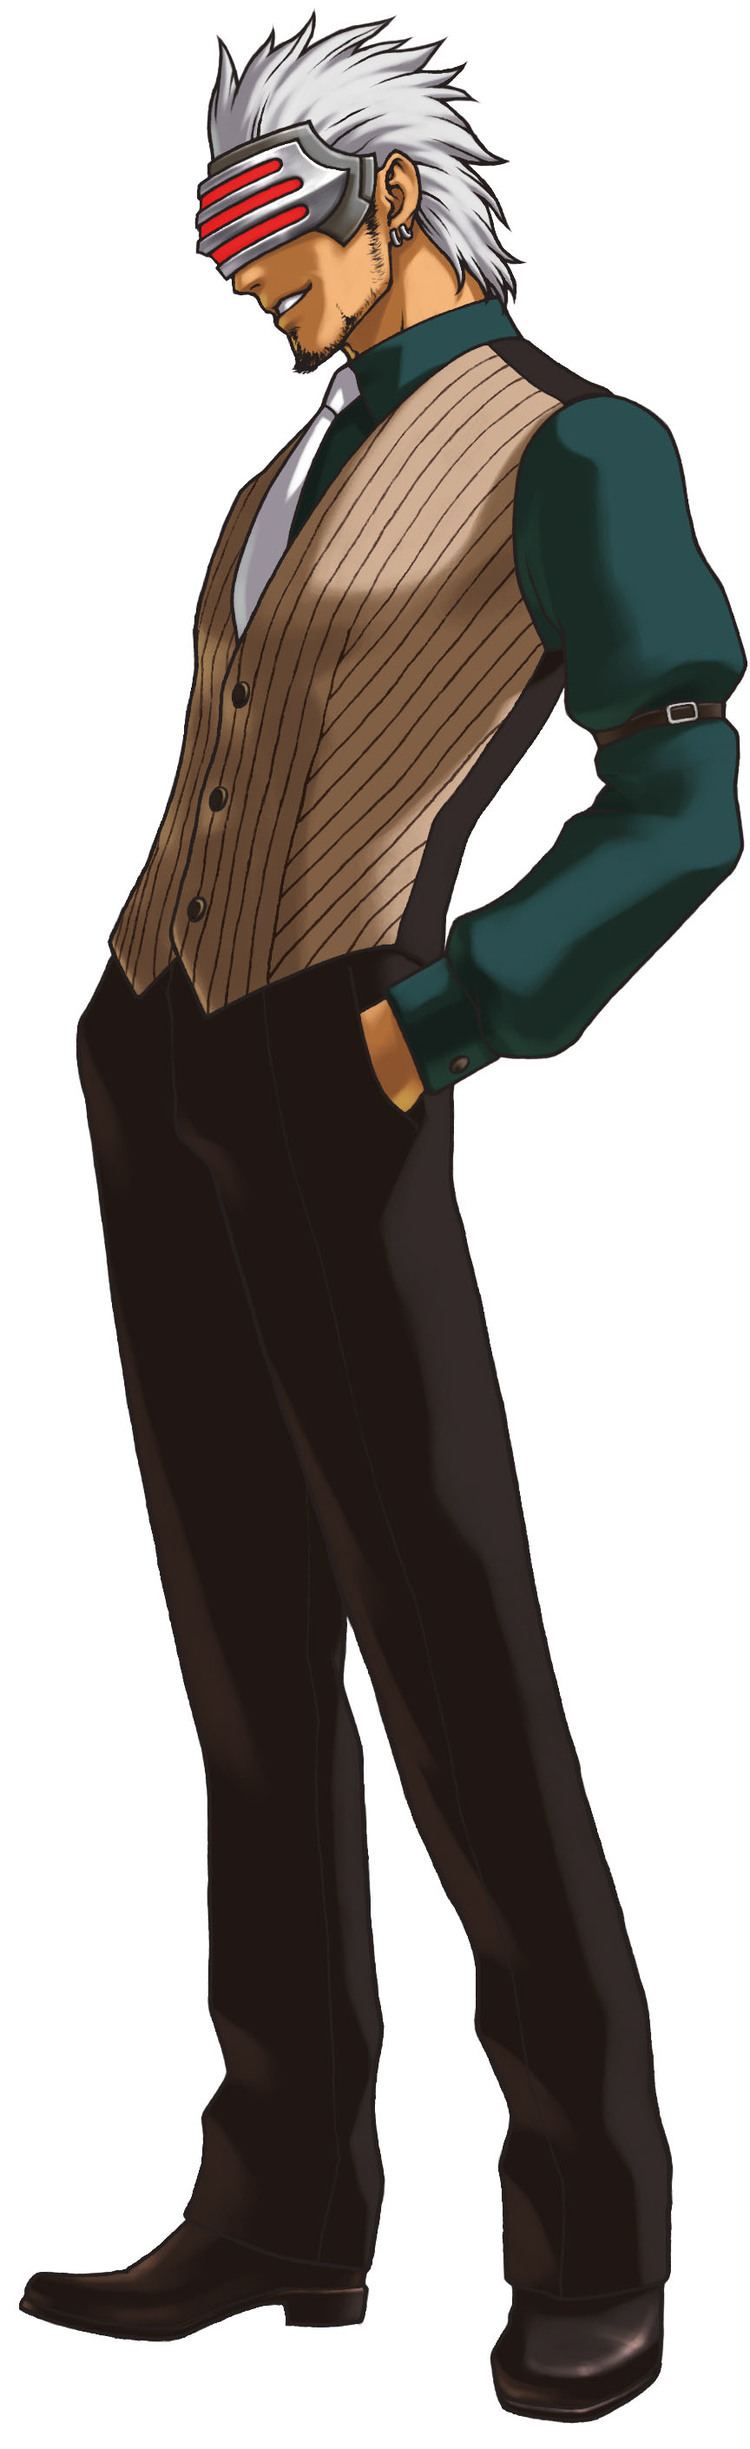 Godot (Ace Attorney) Godot from the Ace Attorney Series